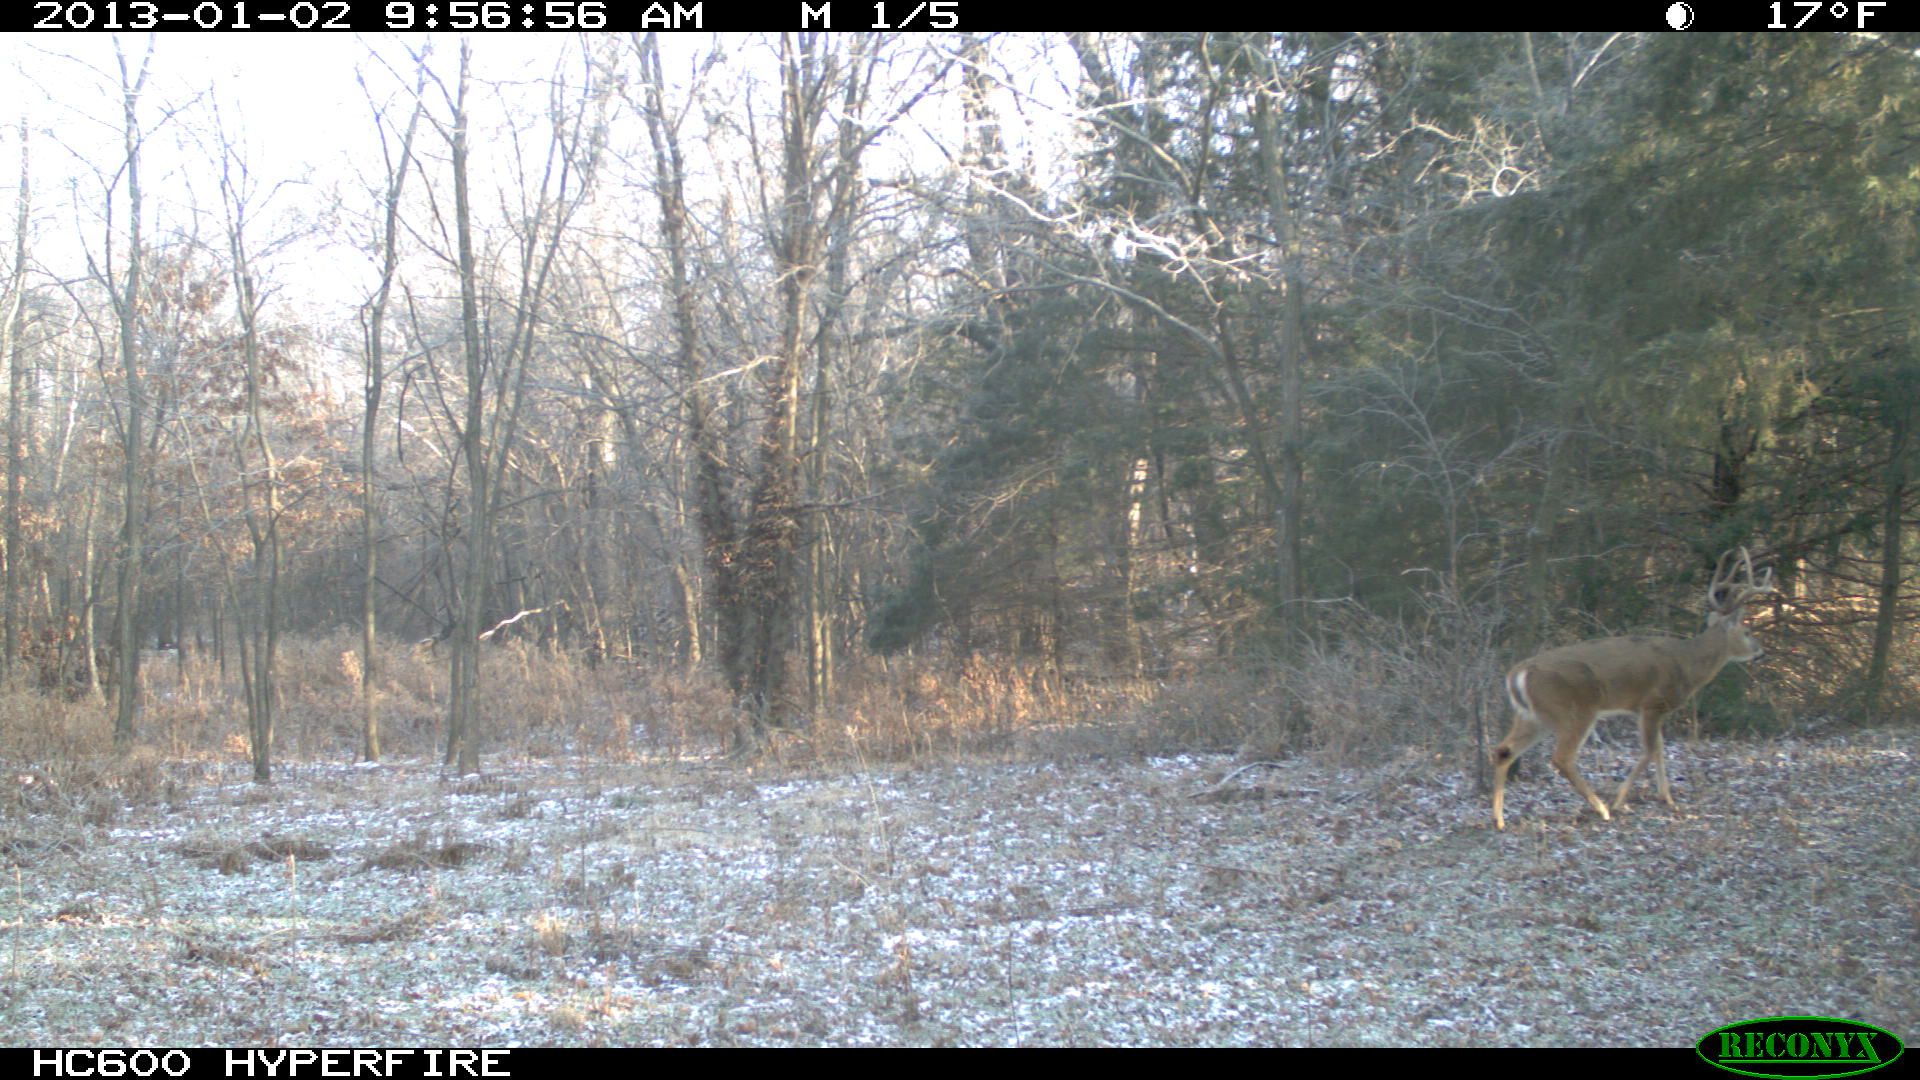 We found both sheds to the buck in this picture